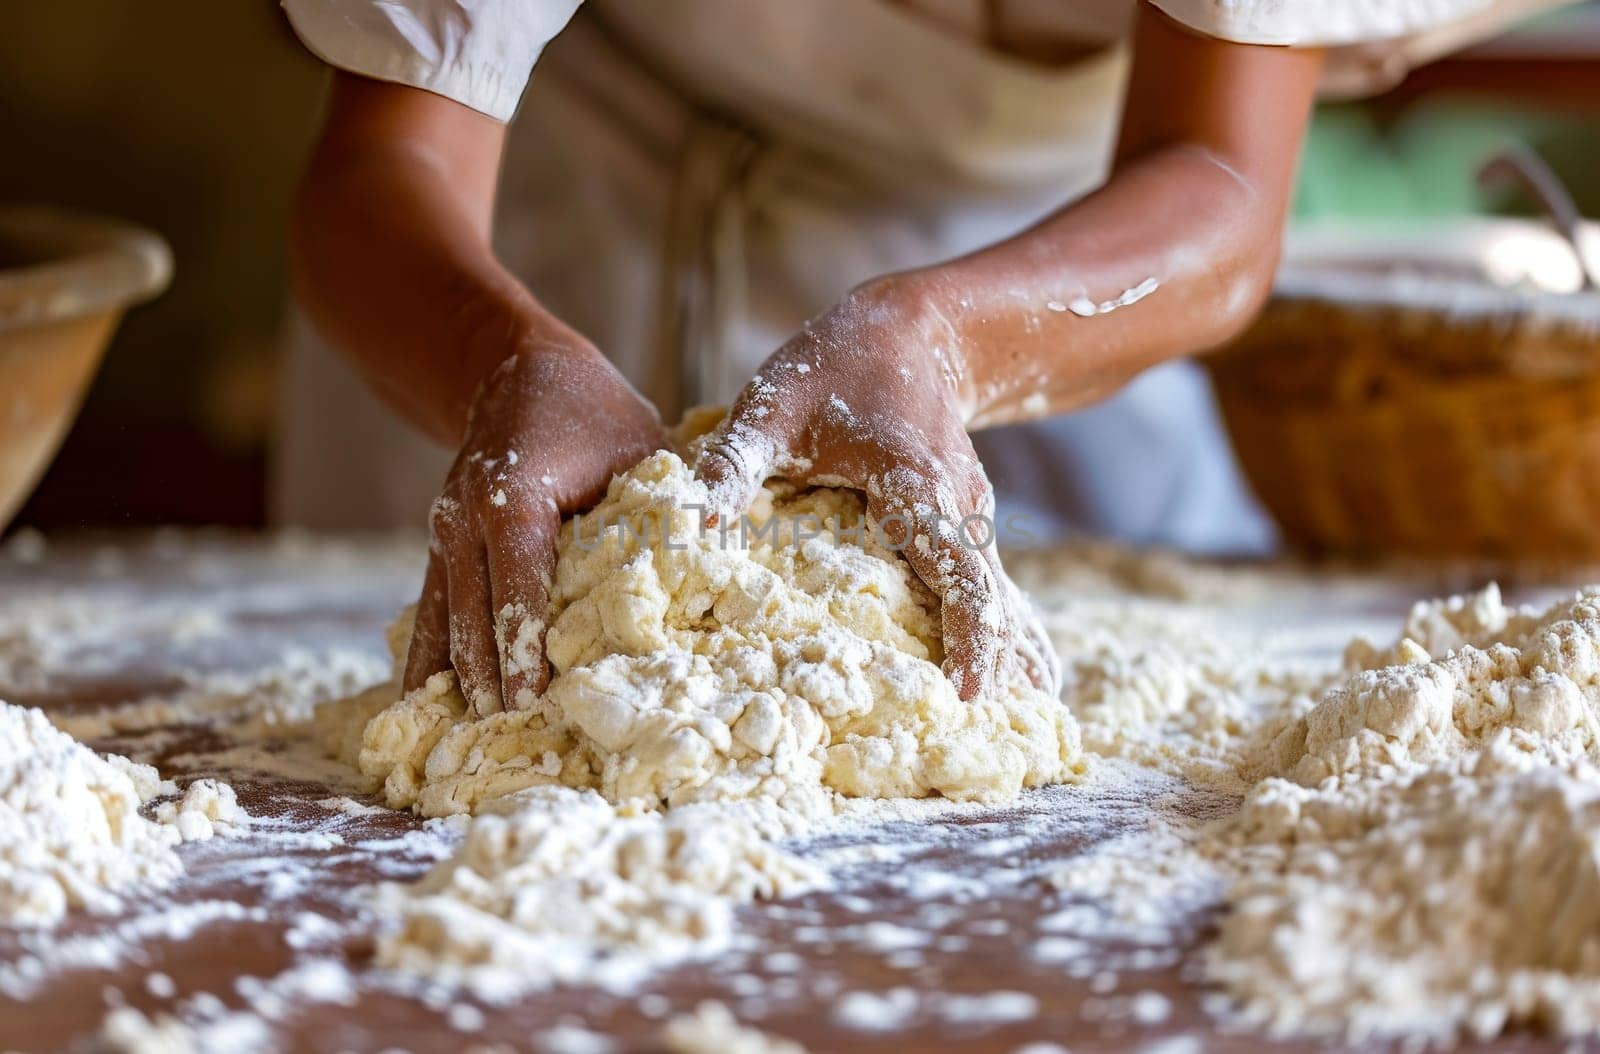 A person passionately kneading dough for bread on top of a table in a cozy home kitchen